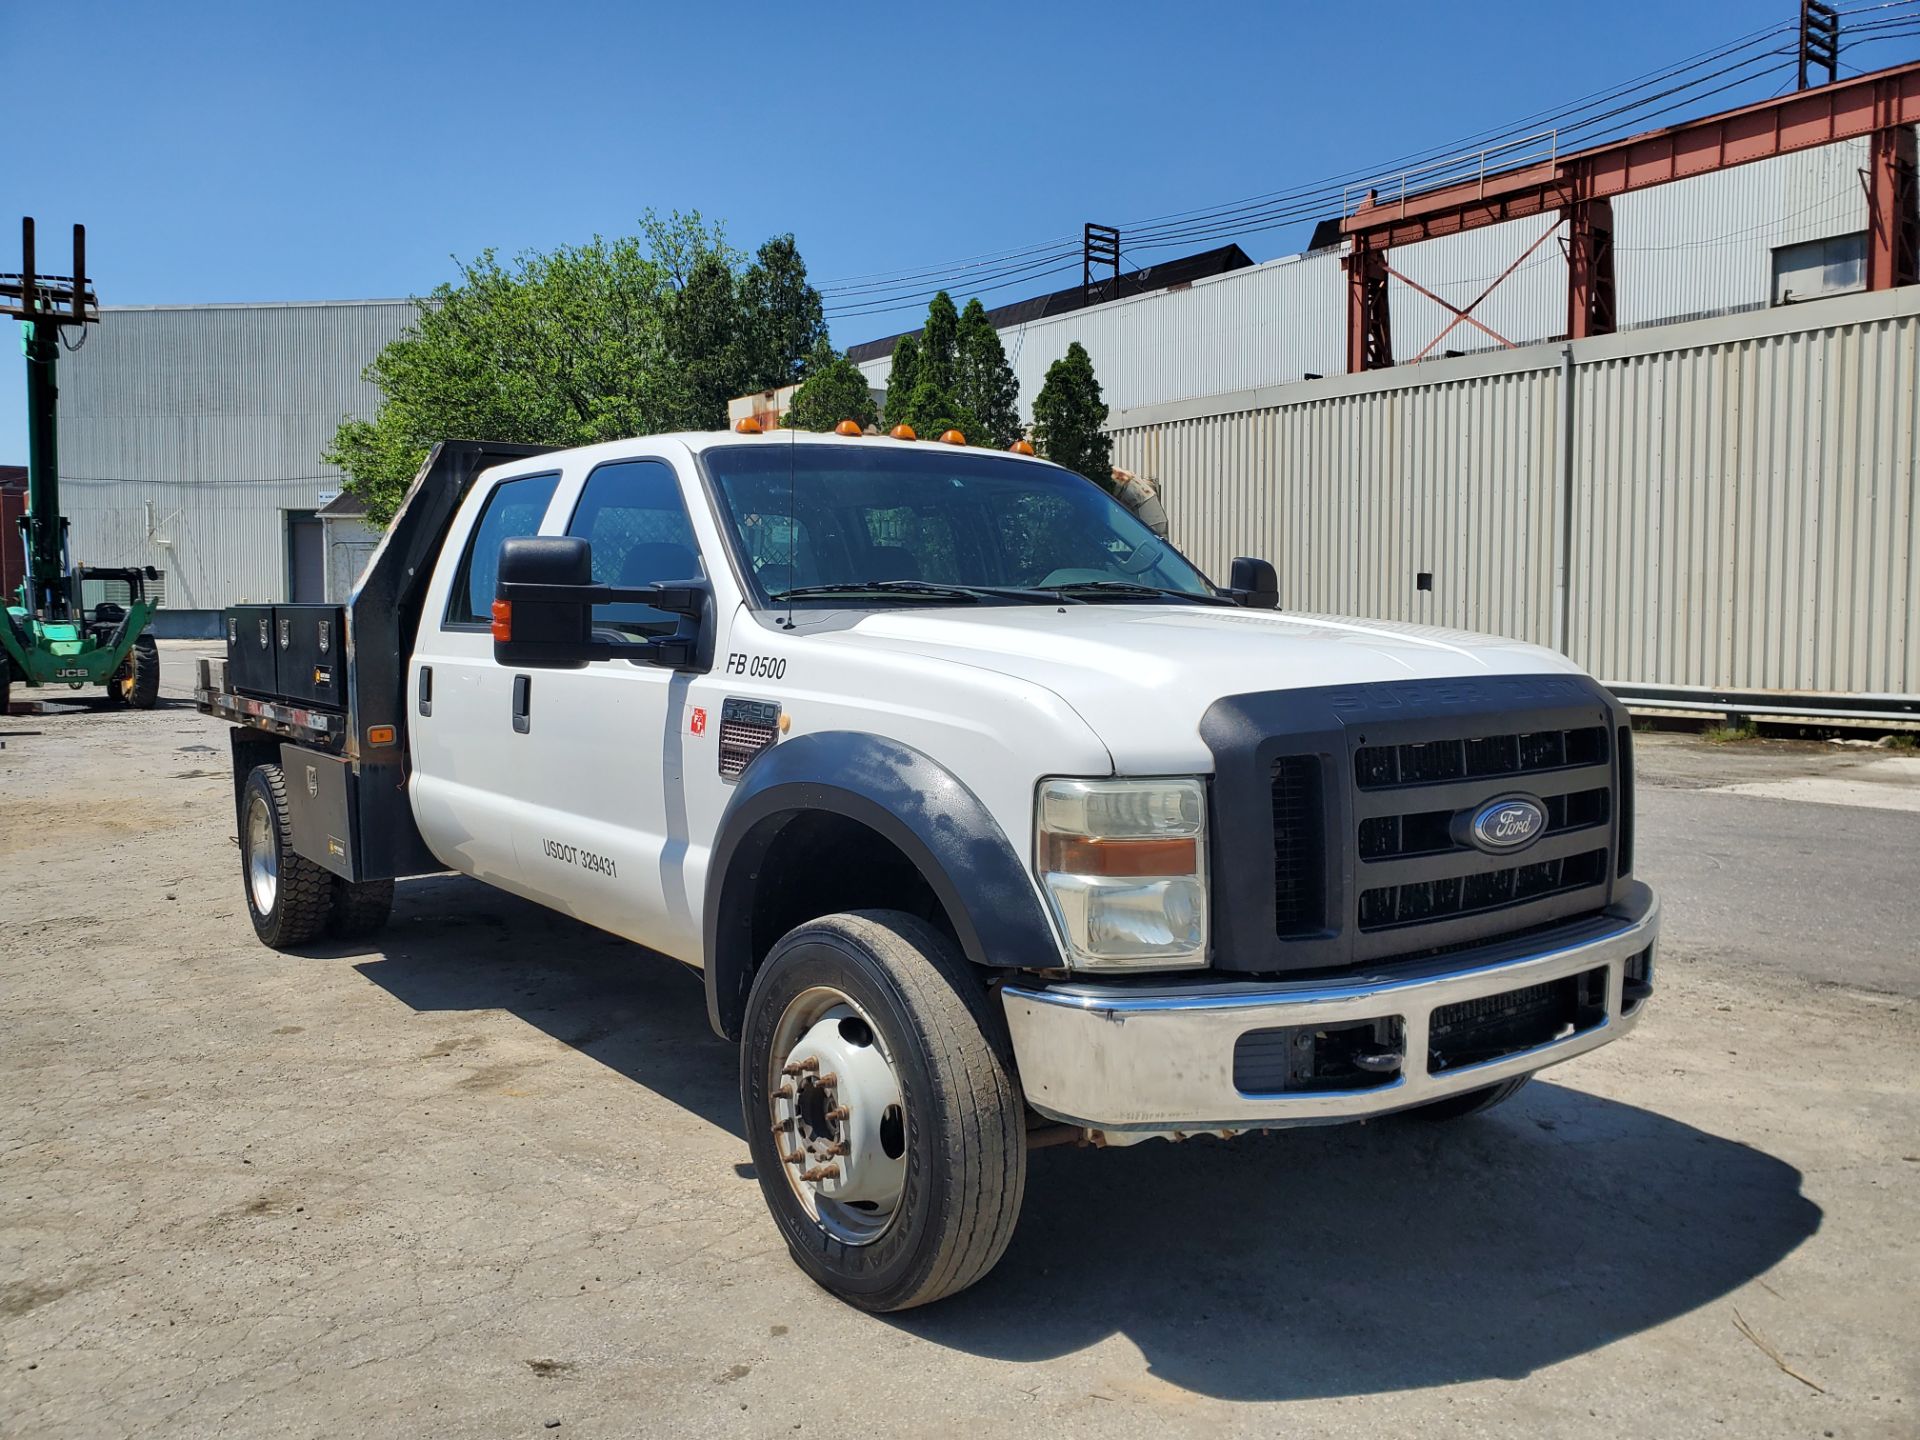 2010 Ford F450 Crew Cab Truck - Image 2 of 21